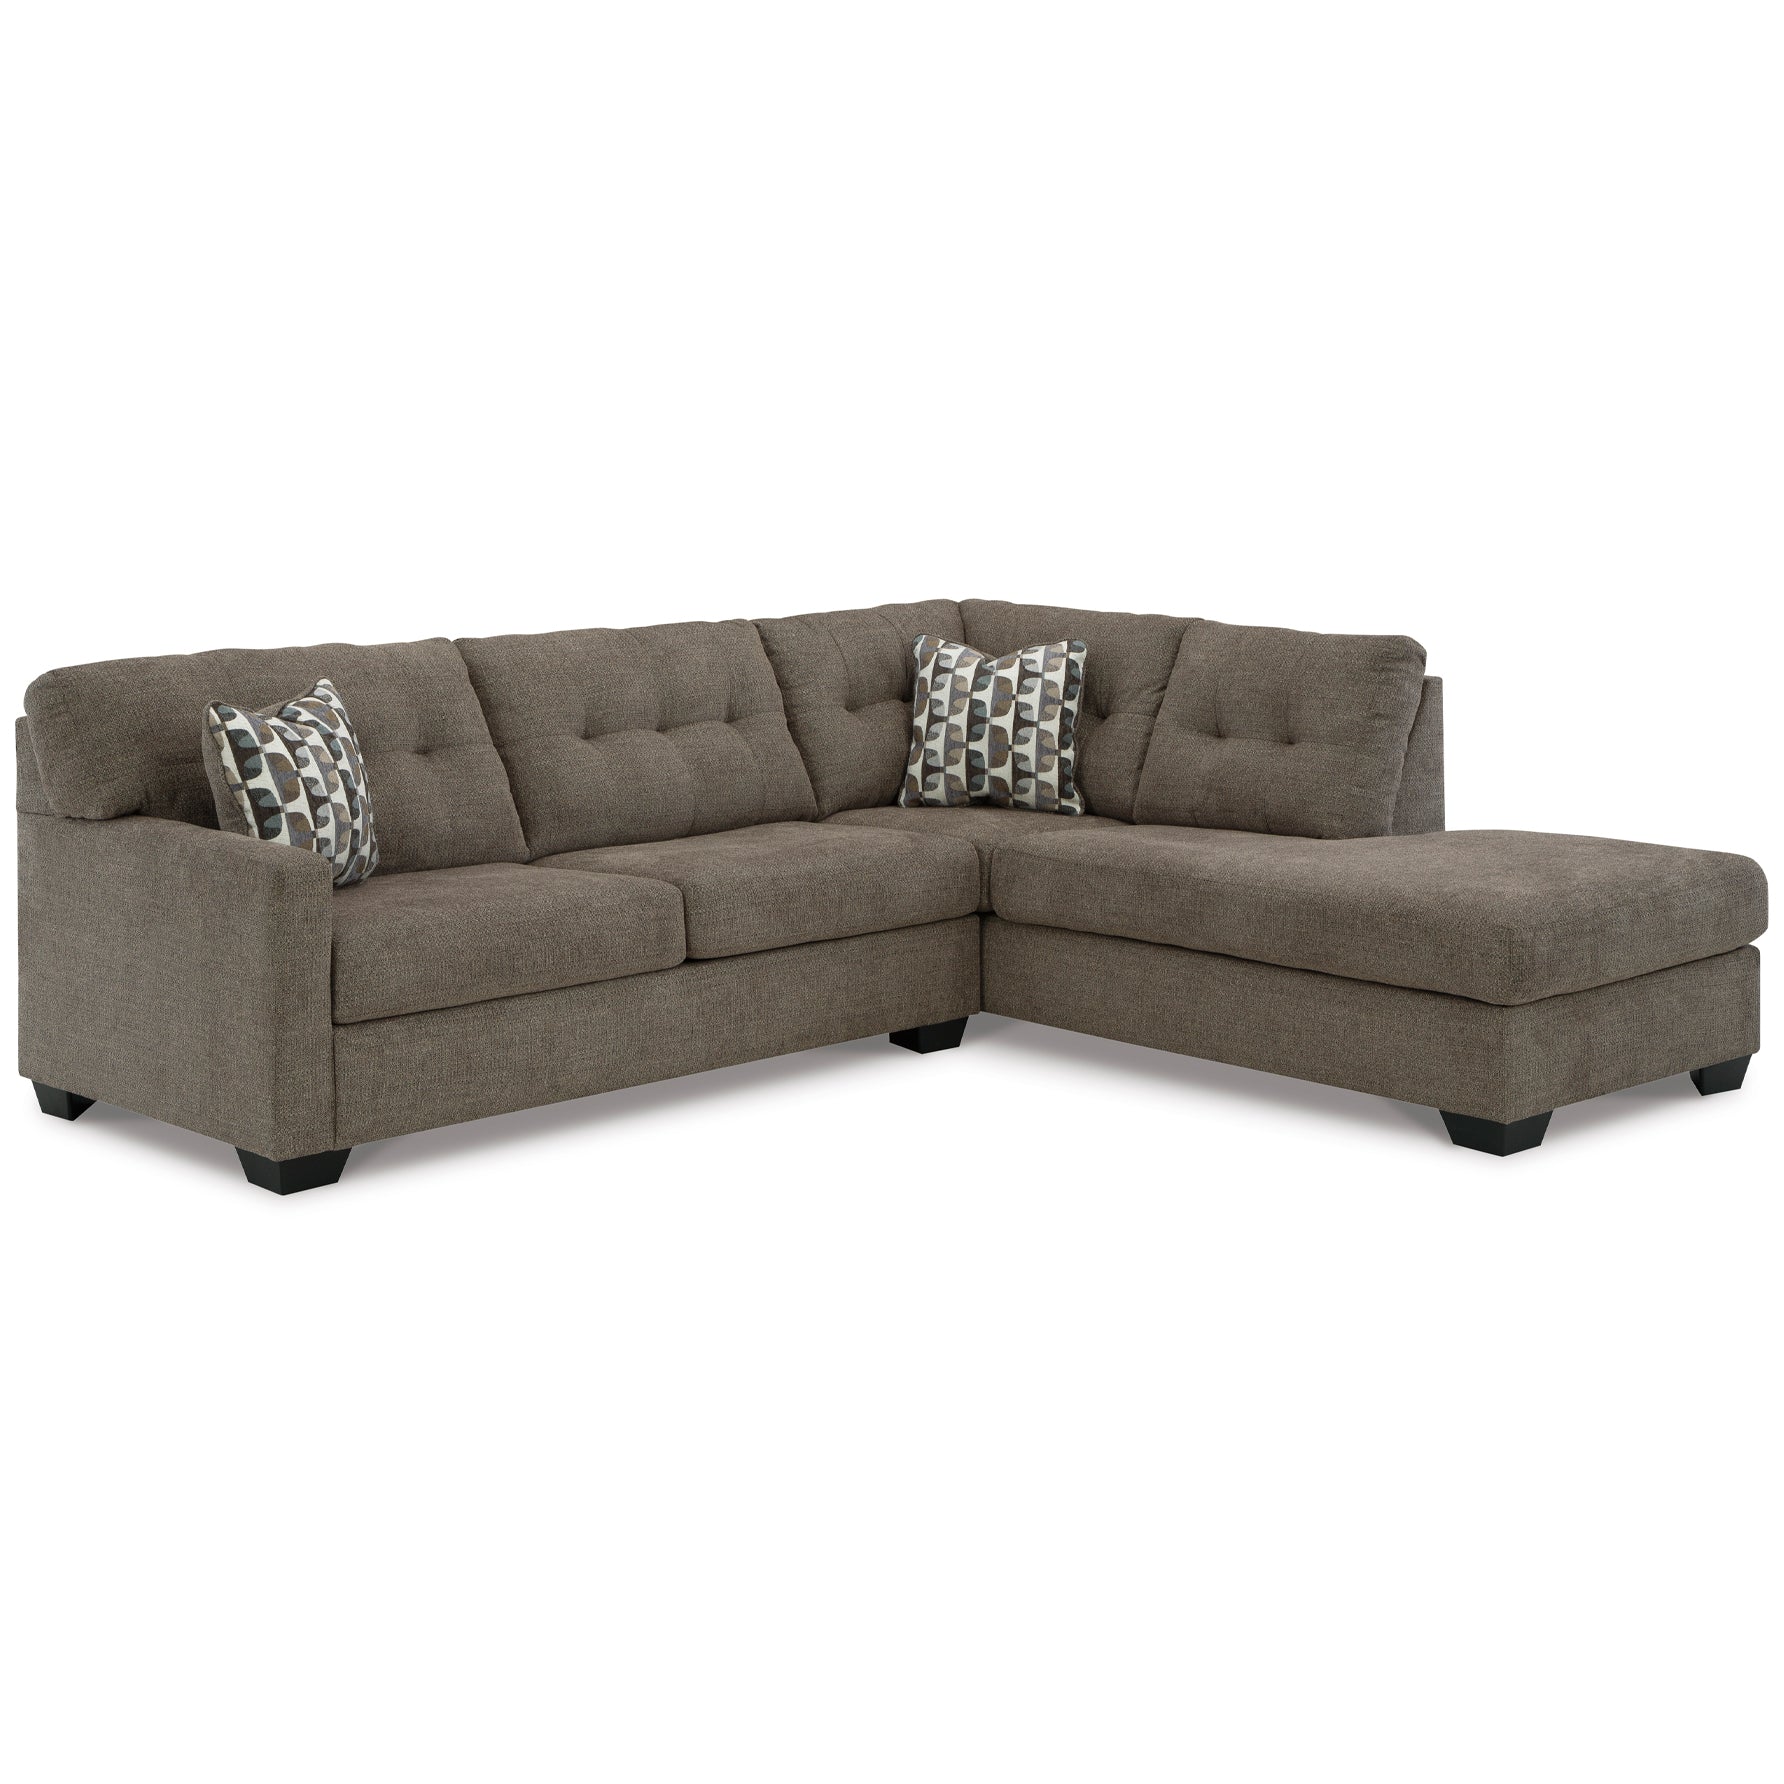 Mahoney 2-Piece Sectional with Chaise in rich chocolate color, ideal for elegant lounging spaces